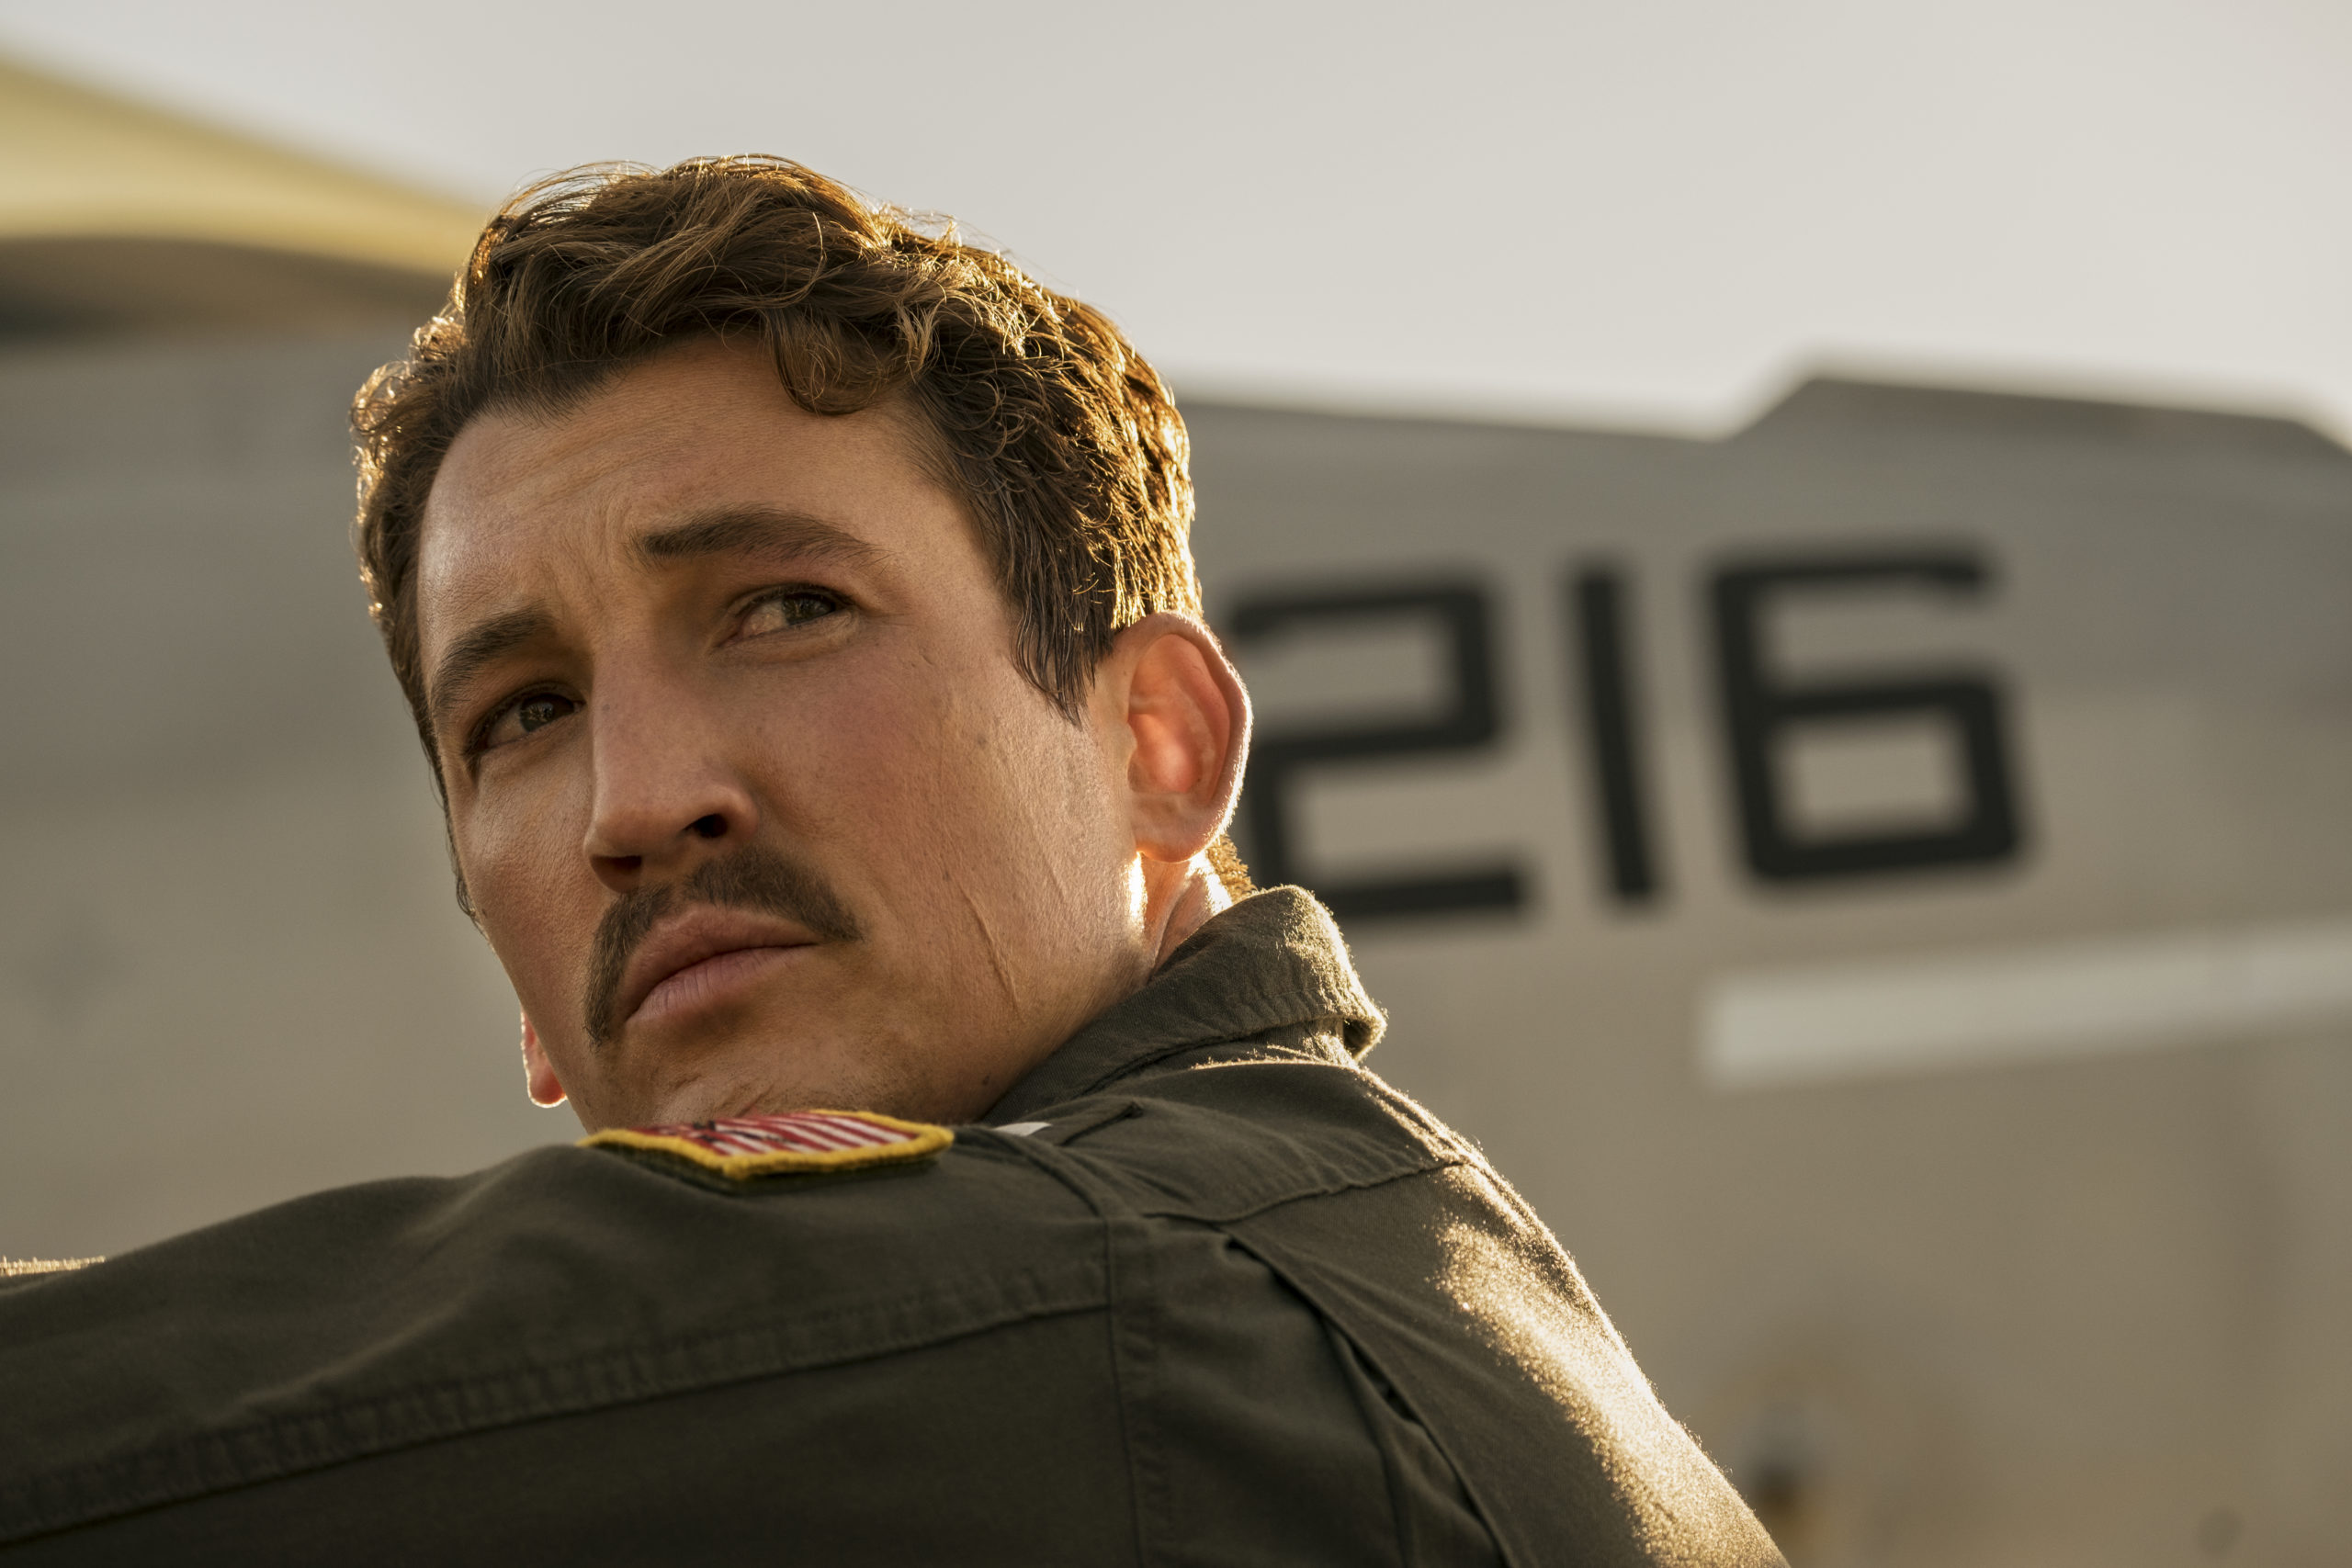 Miles Teller Talks About Top Gun: Maverick Paying Homage To The Original Film [Exclusive Interview]